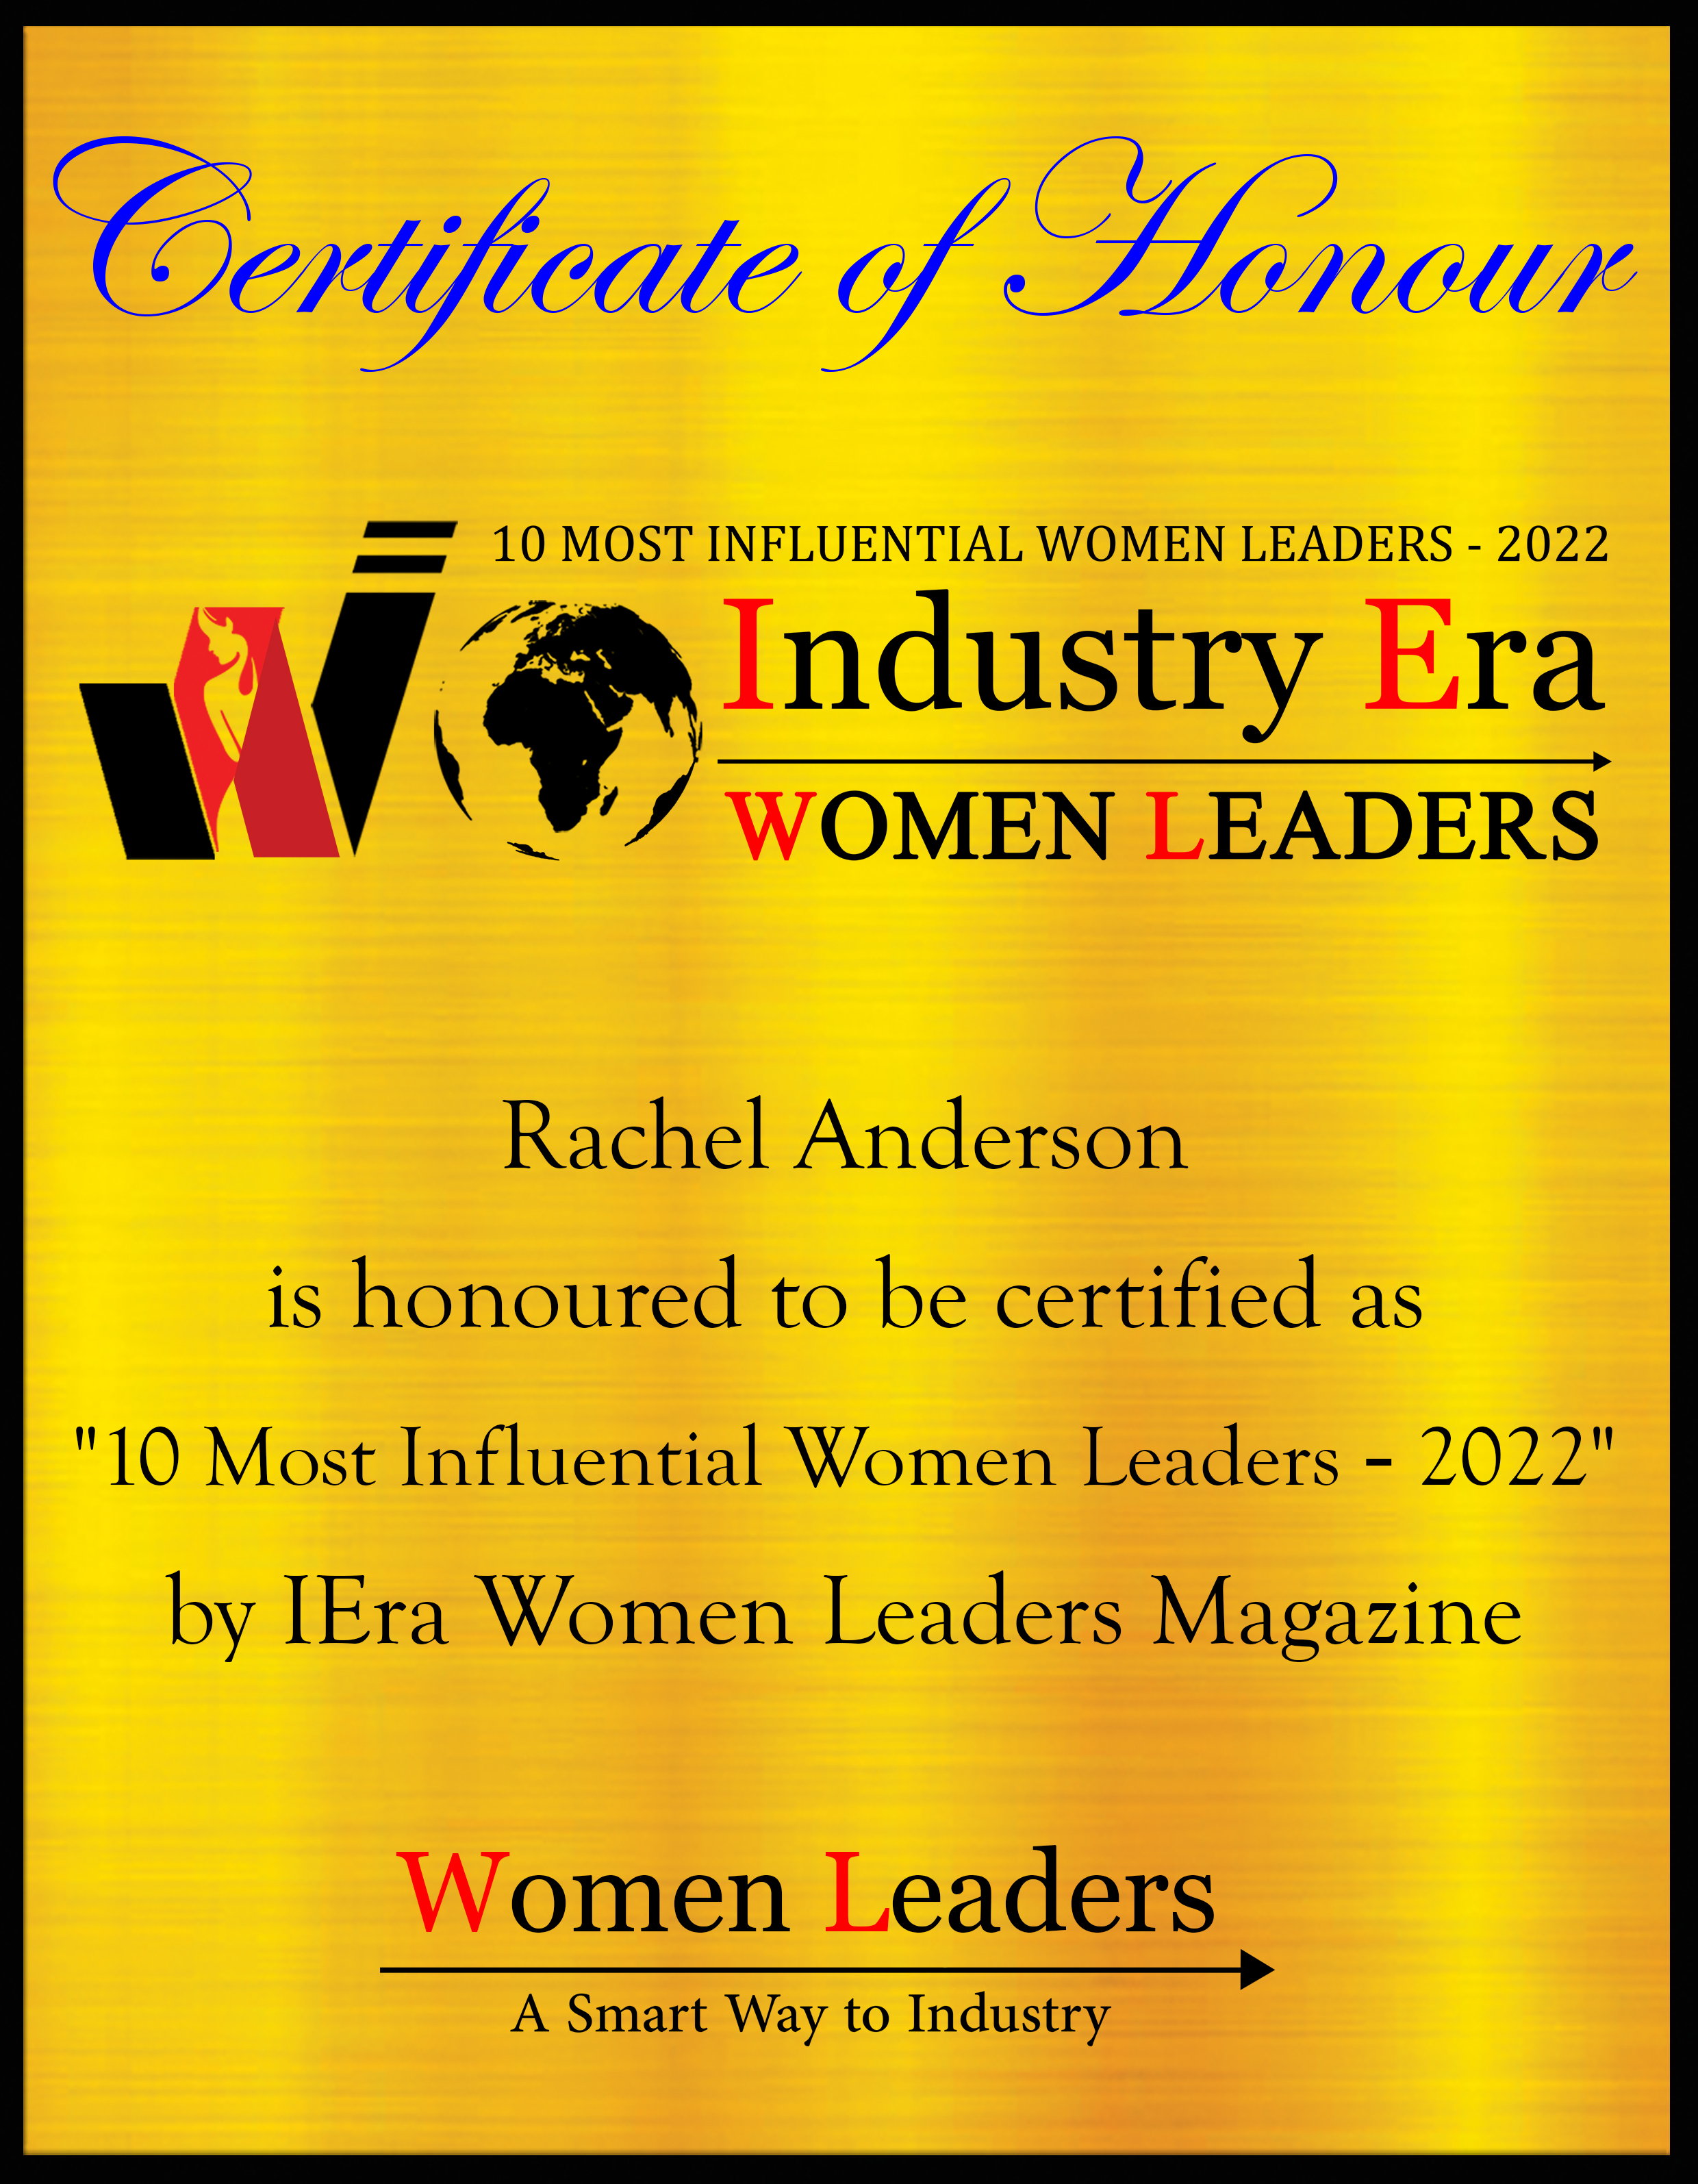 Rachel Anderson, VP of Centralized Operations at Zenernet, 10 Most Influential Women Leaders of 2022